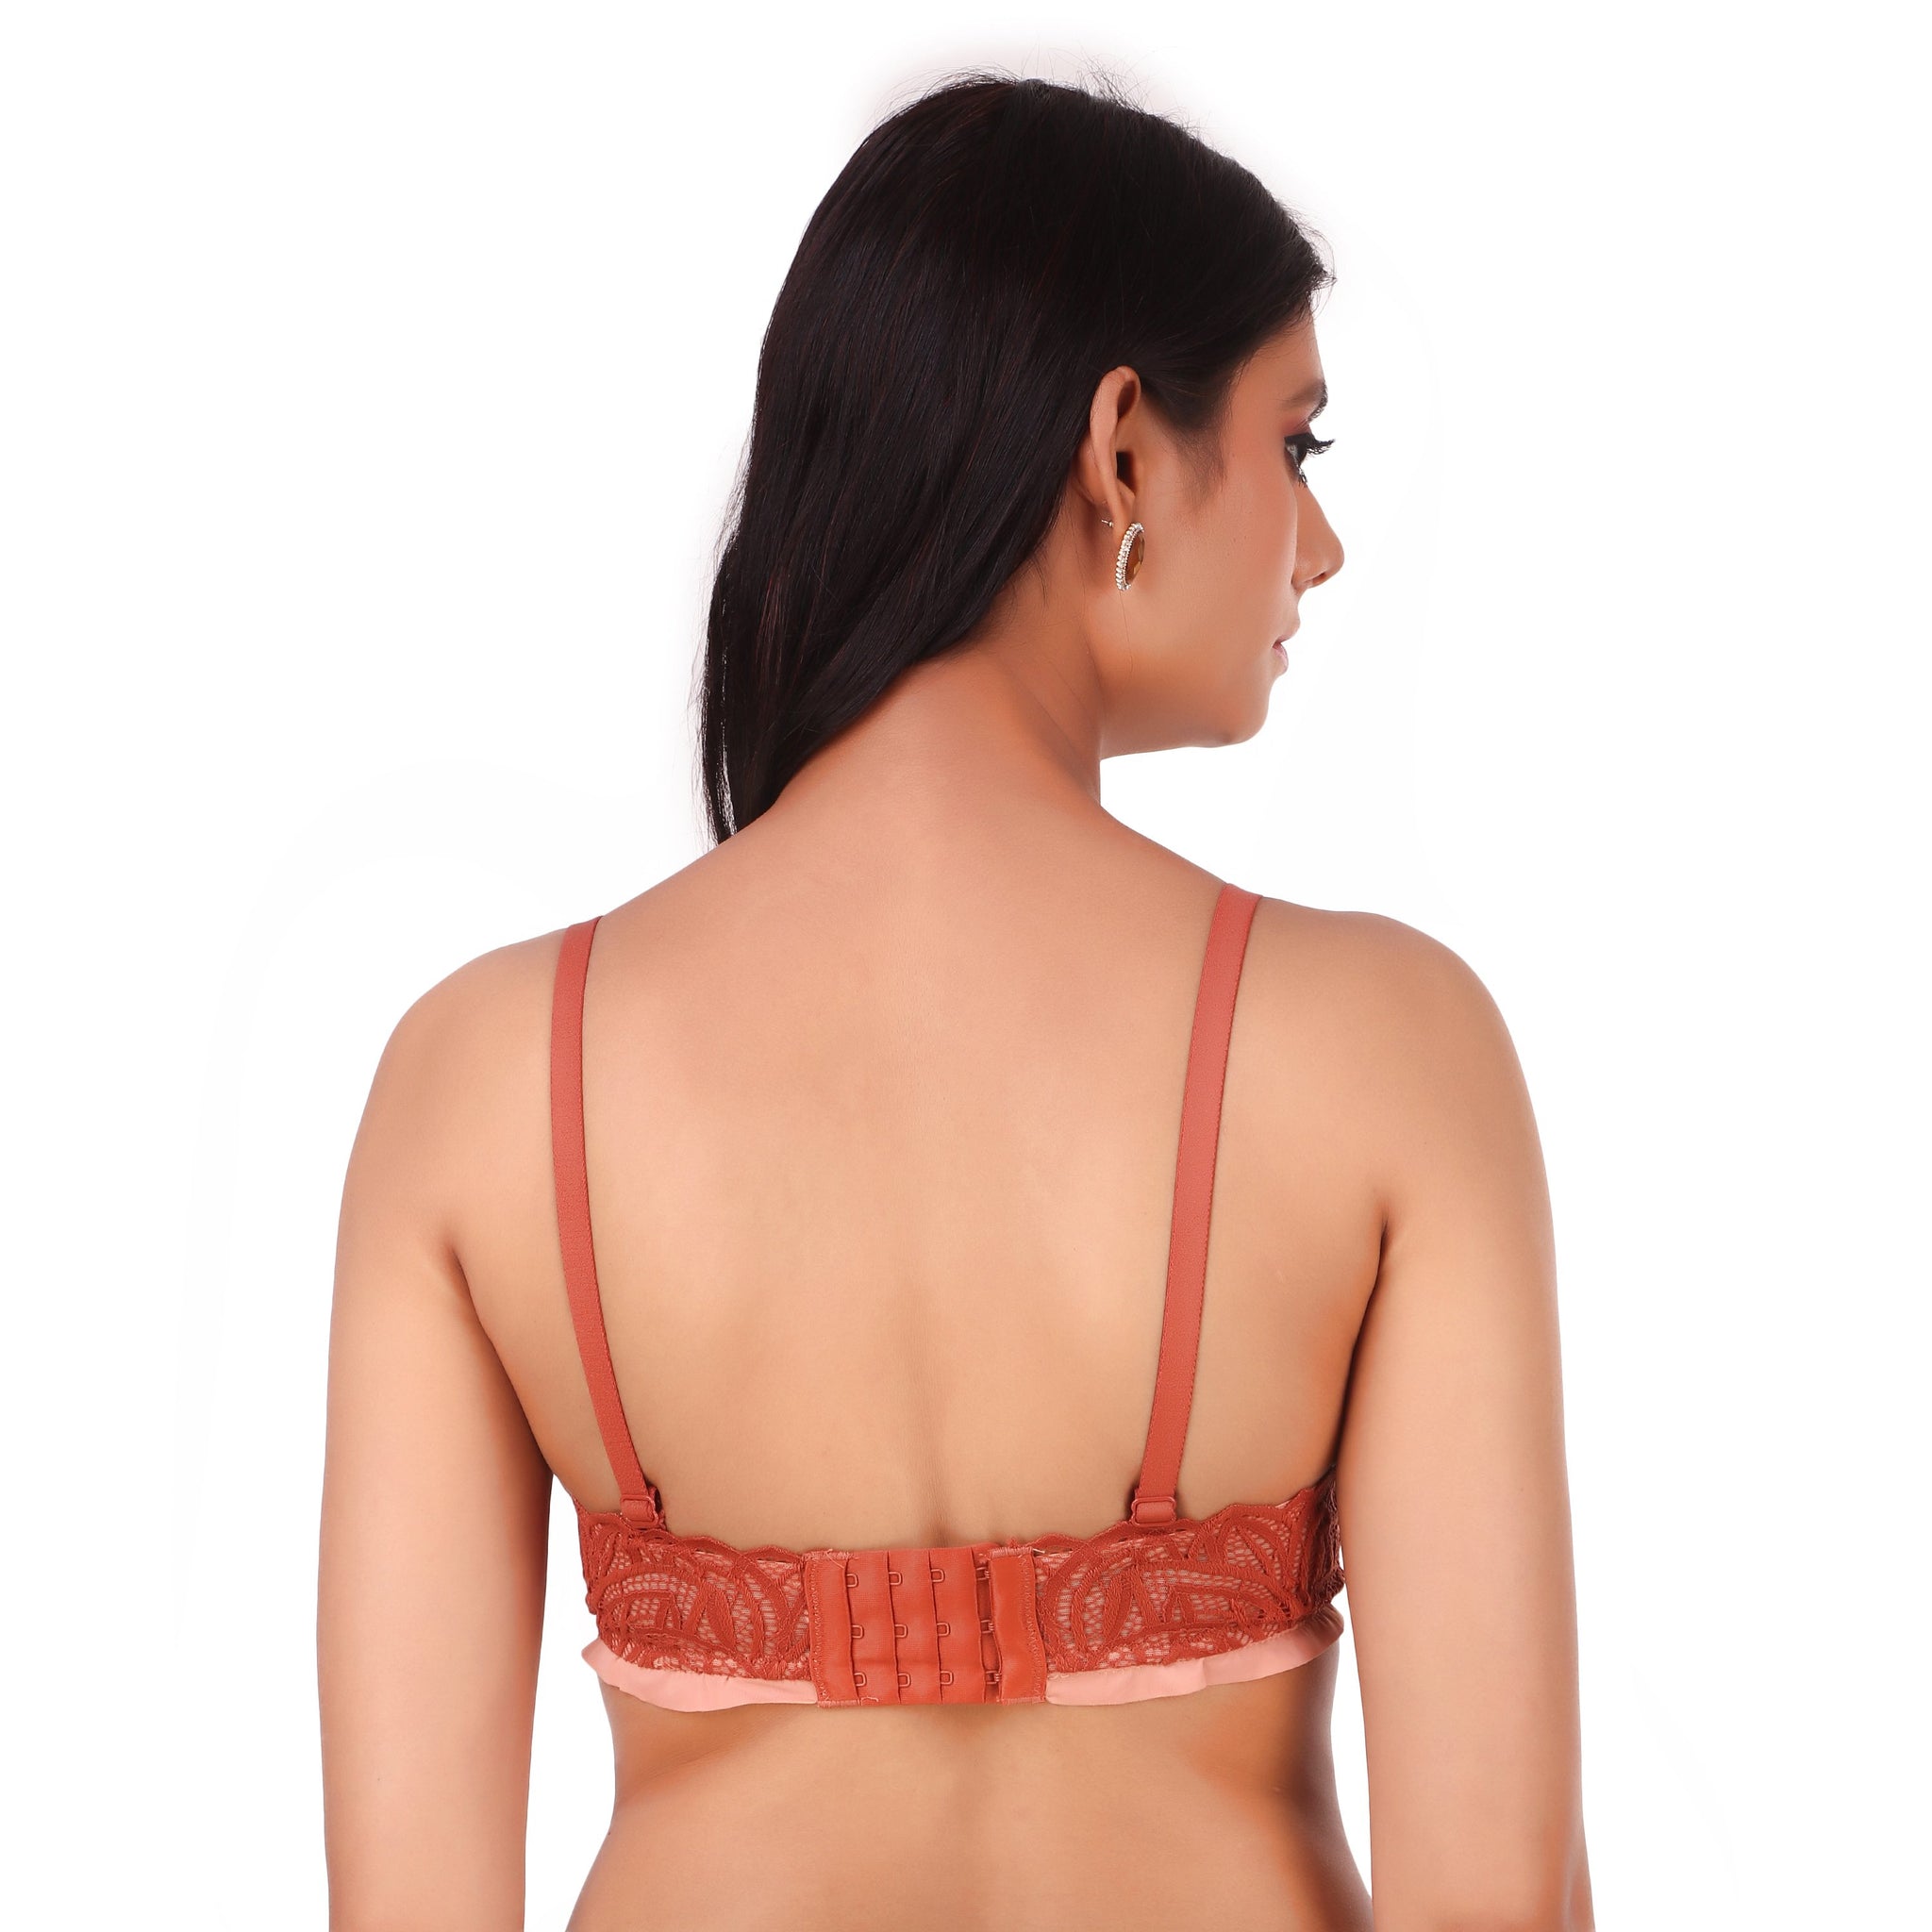 AXTZH-XBRA119 lace it up front bra and panty set